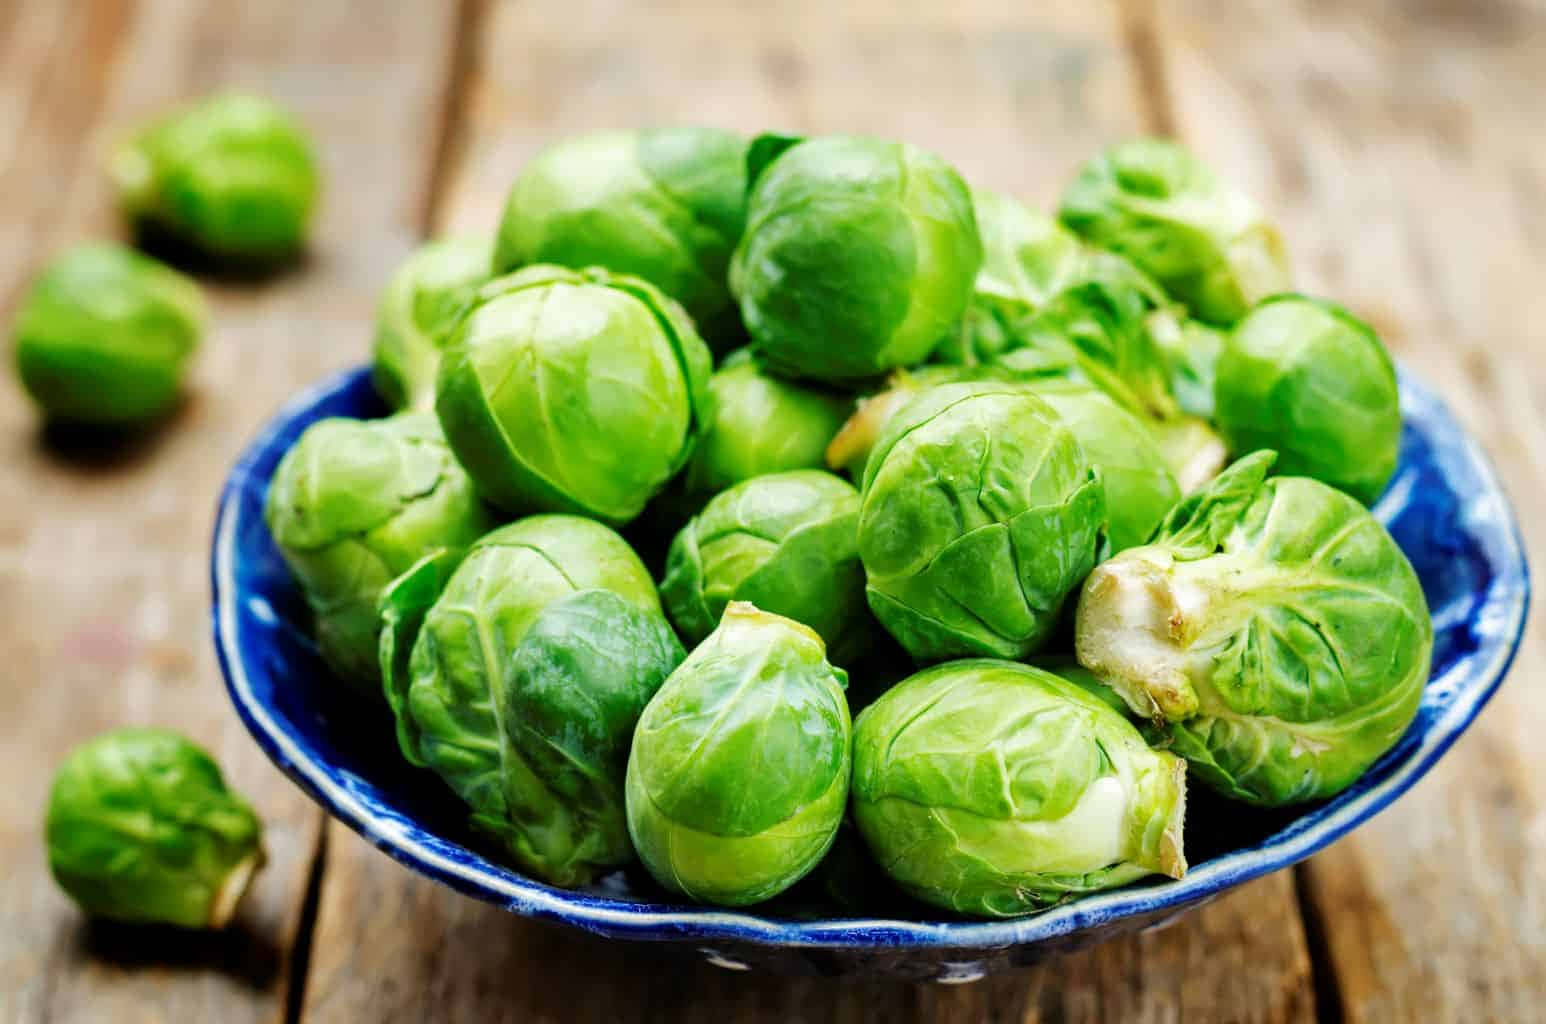 Brussels Sprouts In A Blue Bowl On A Wooden Table